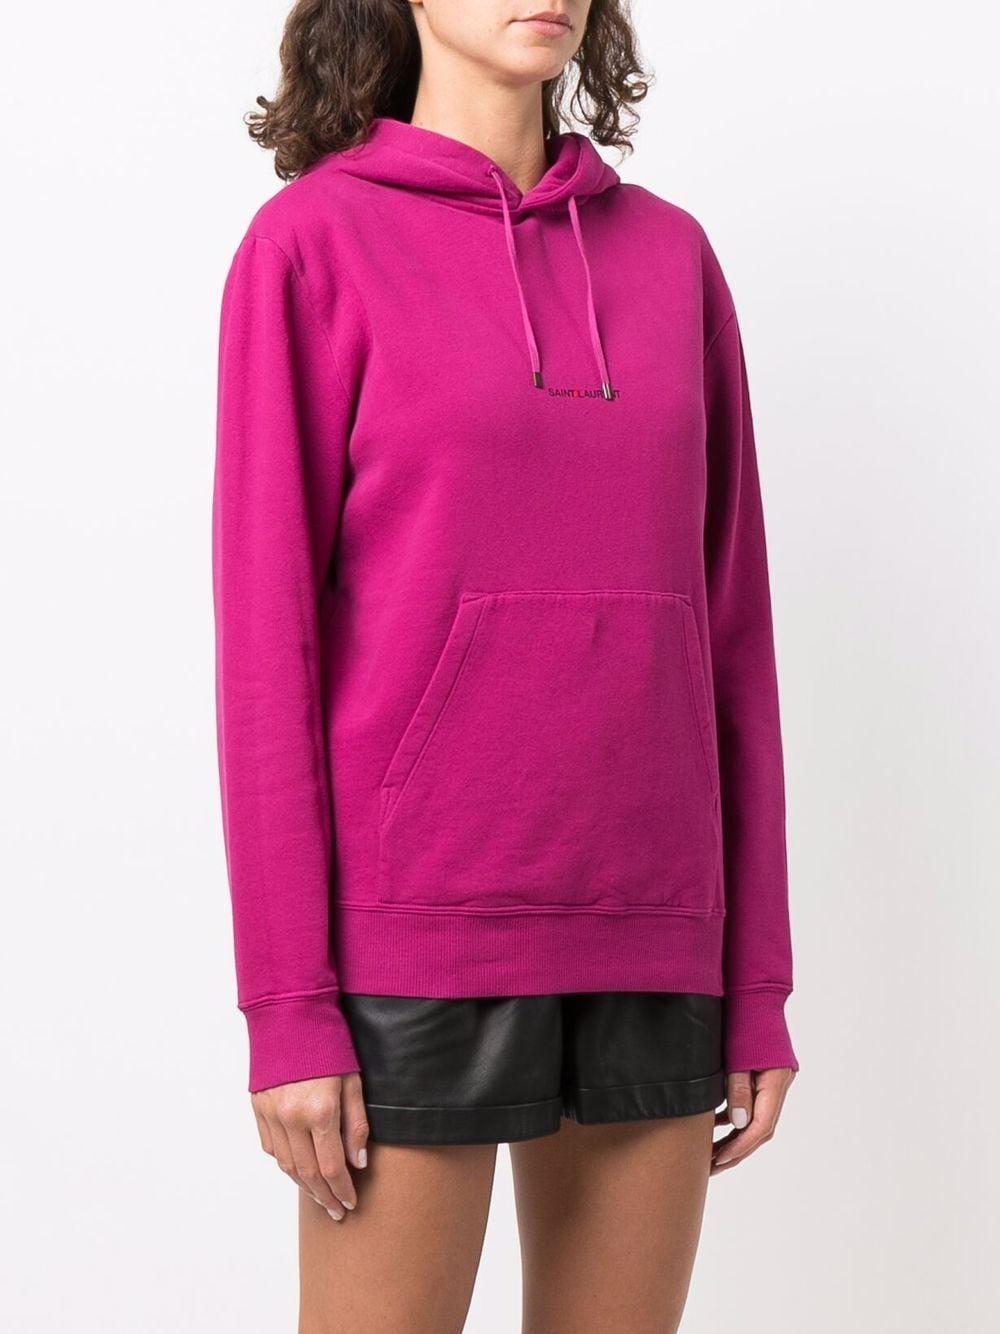 Saint Laurent Cotton Sweaters Fuchsia in Violet (Pink) - Save 60 